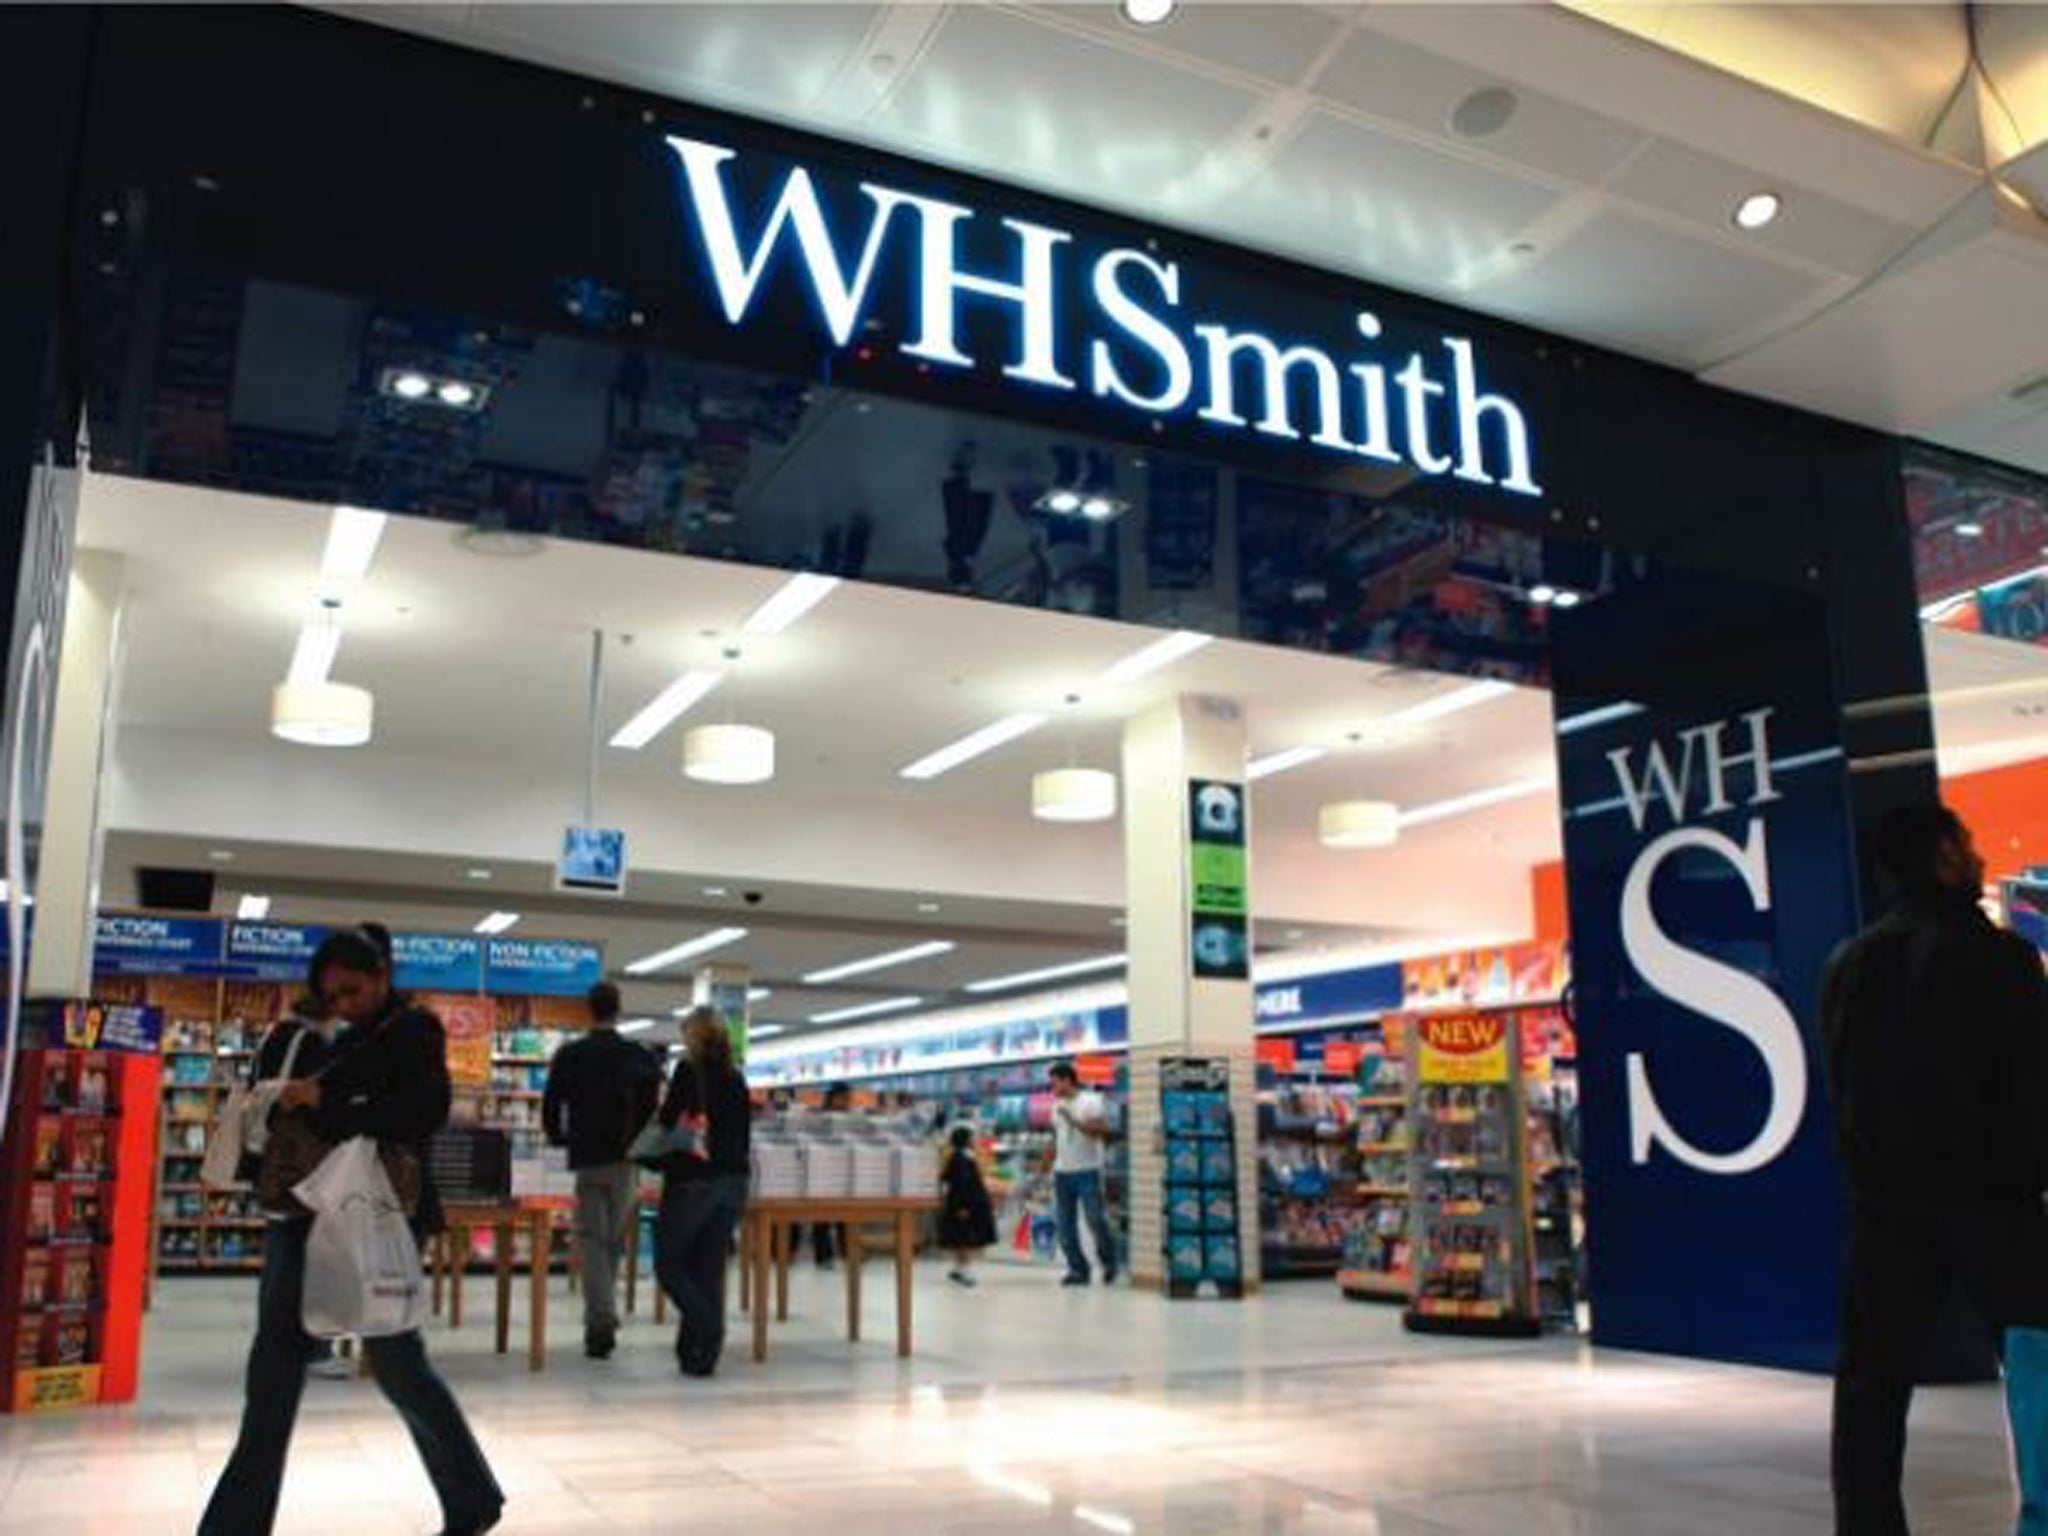 WH Smith has taken its website down after being involved in a porn e-book scandal